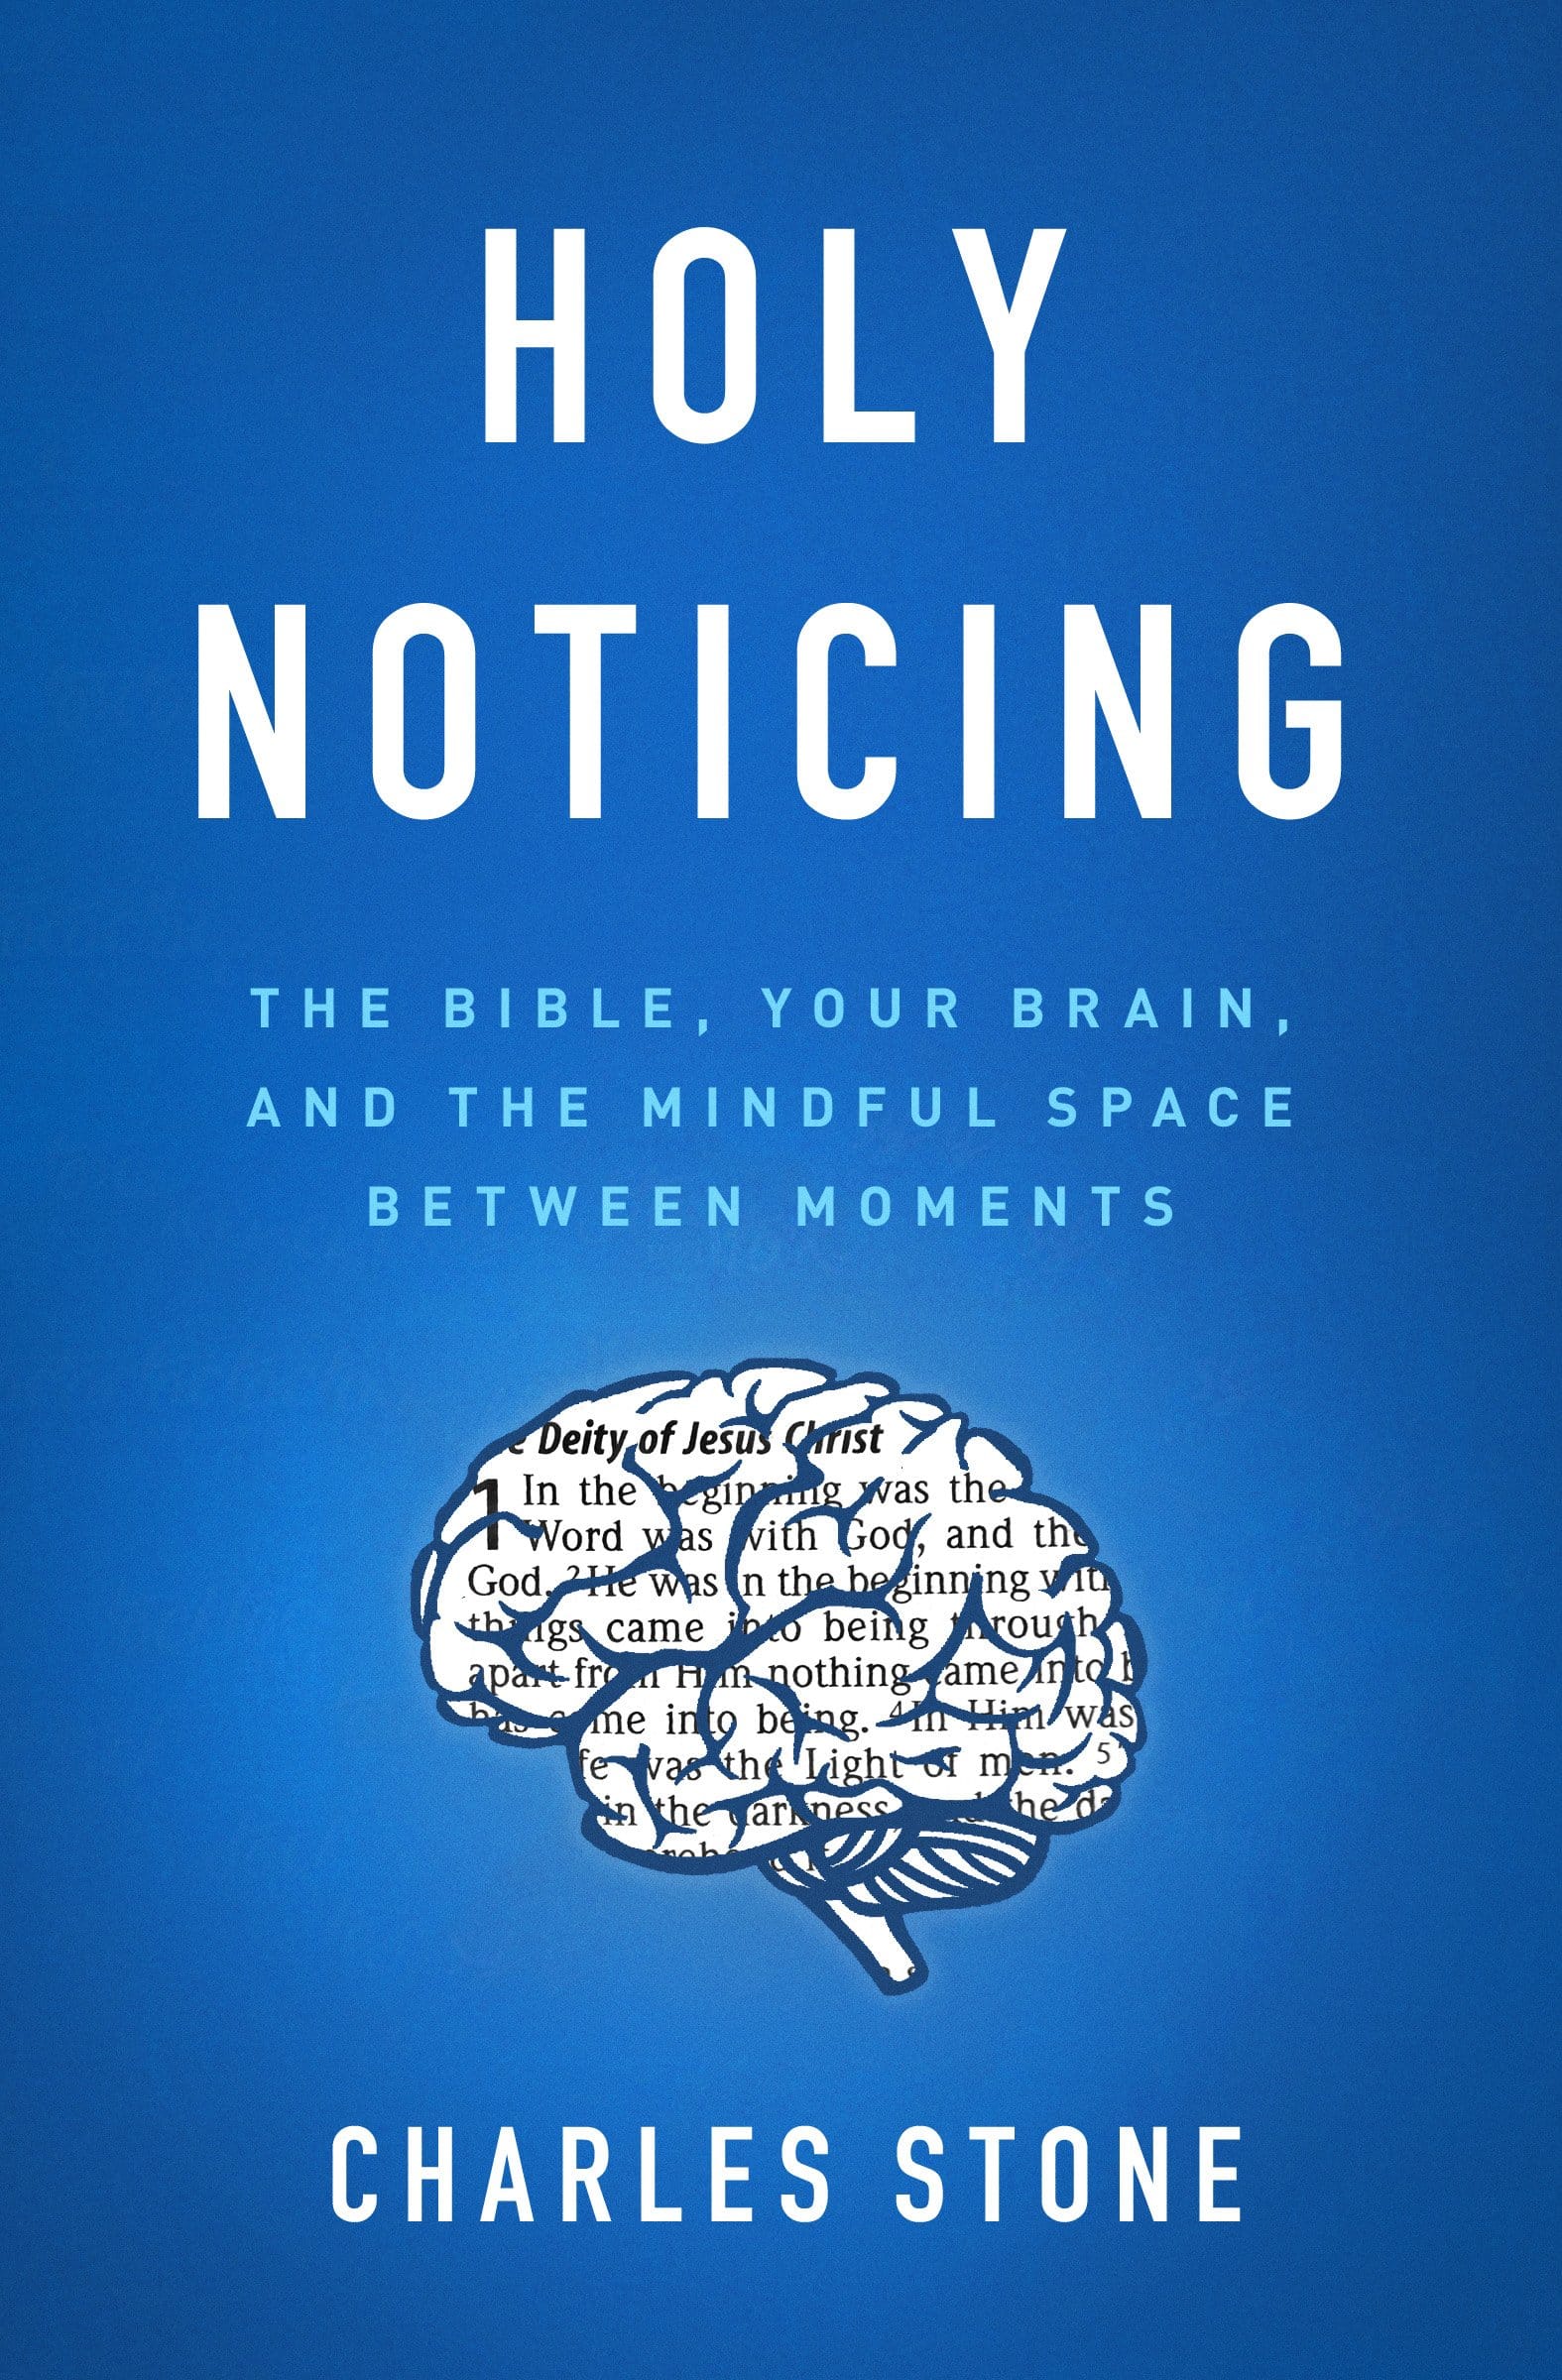 Holy Noticing by Charles Stone, a book recommendation from a Christian counselor to help anxiety and worry